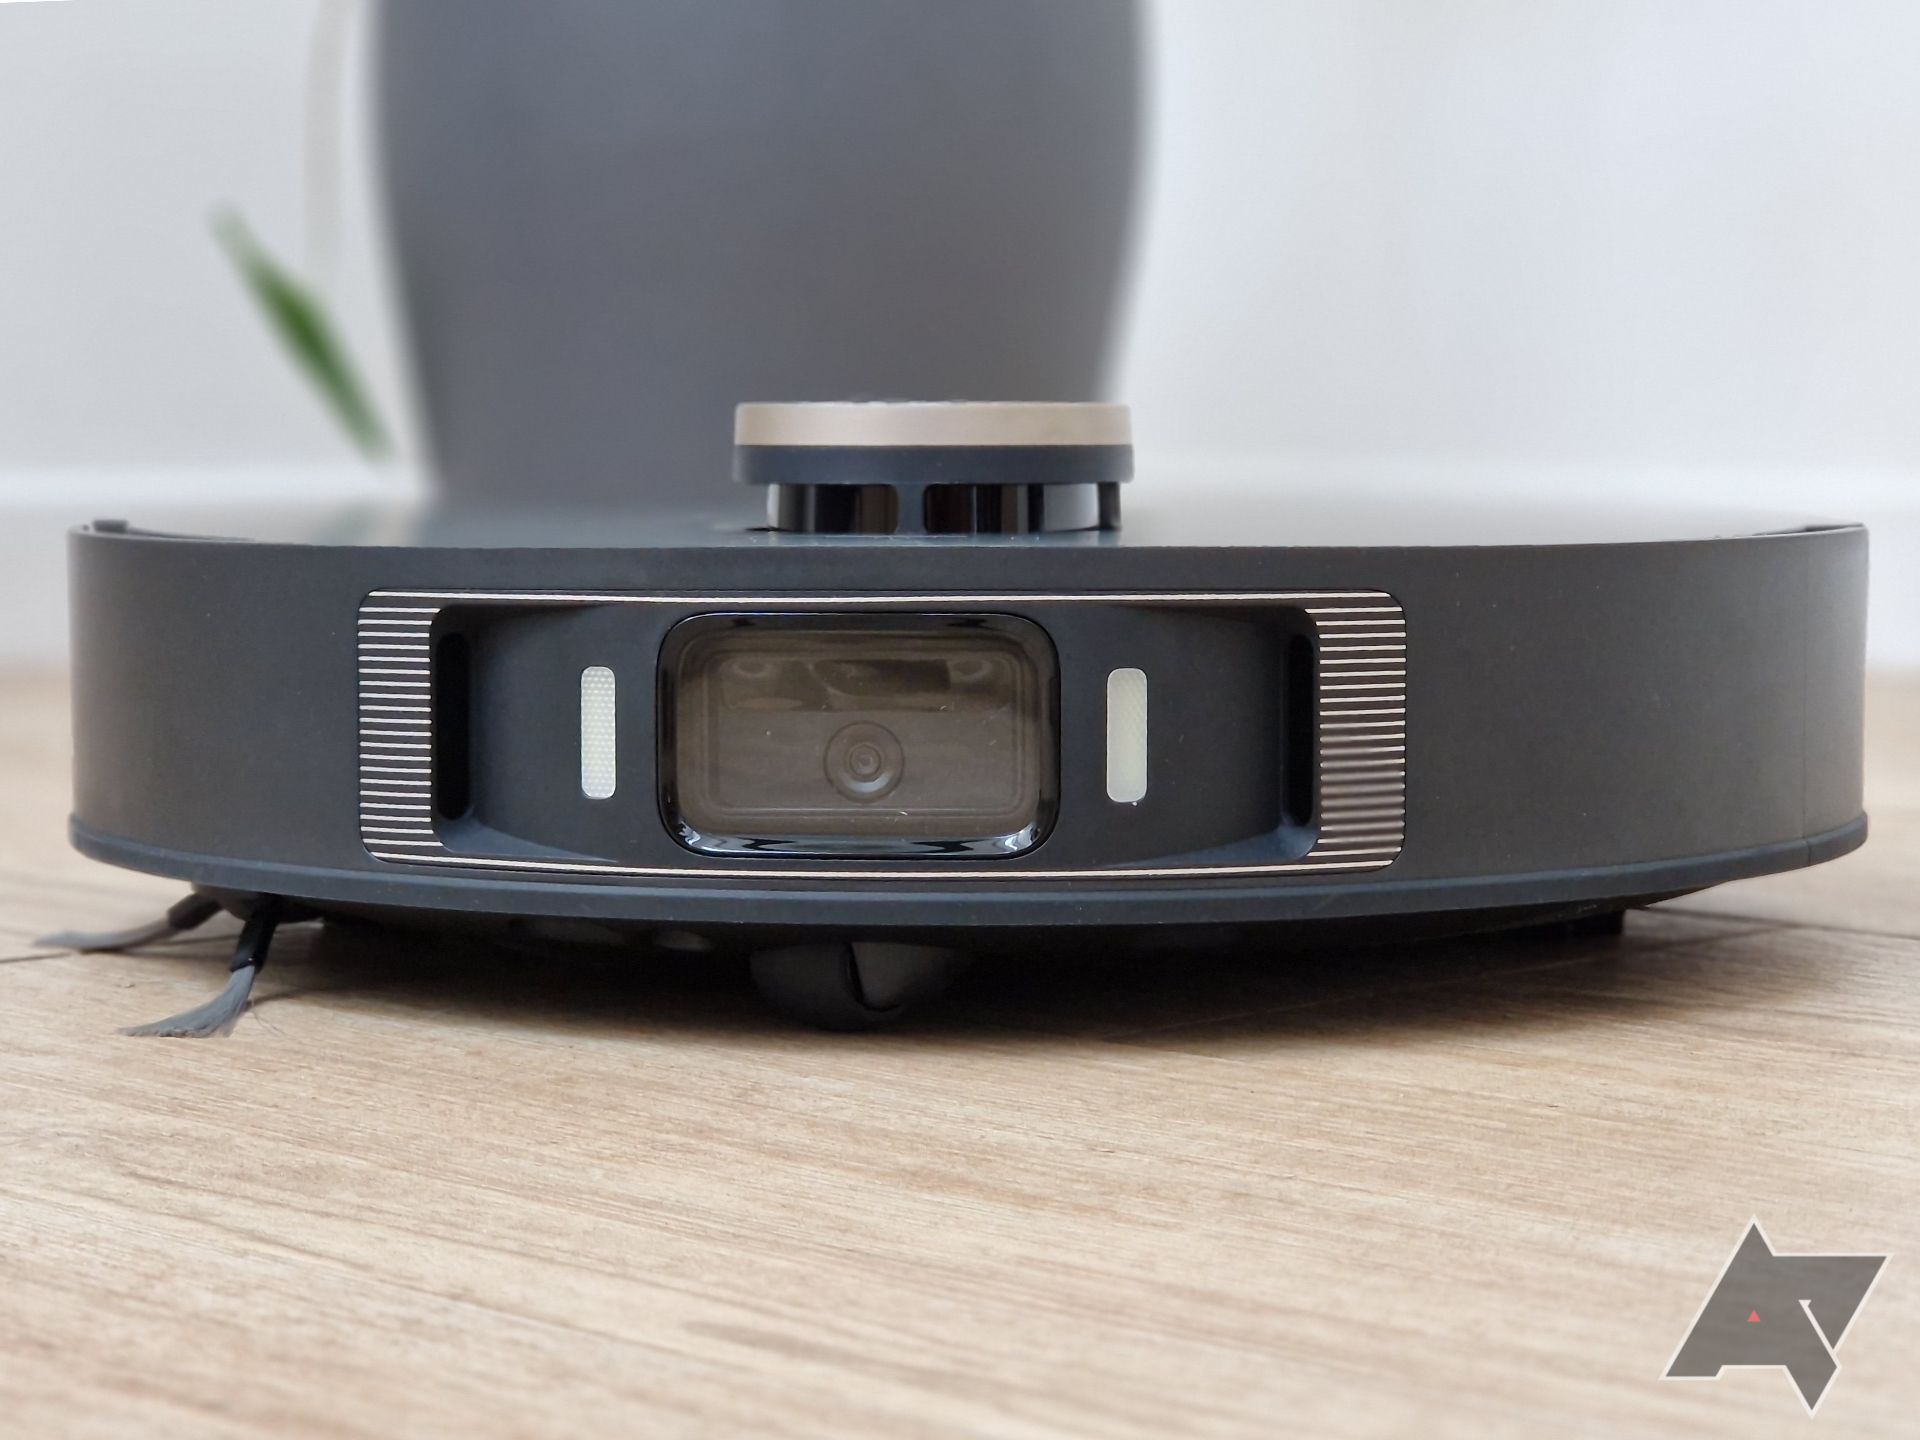 Dreame L20 Ultra review: the unrivaled robot vacuum cleaner - GizChina.it